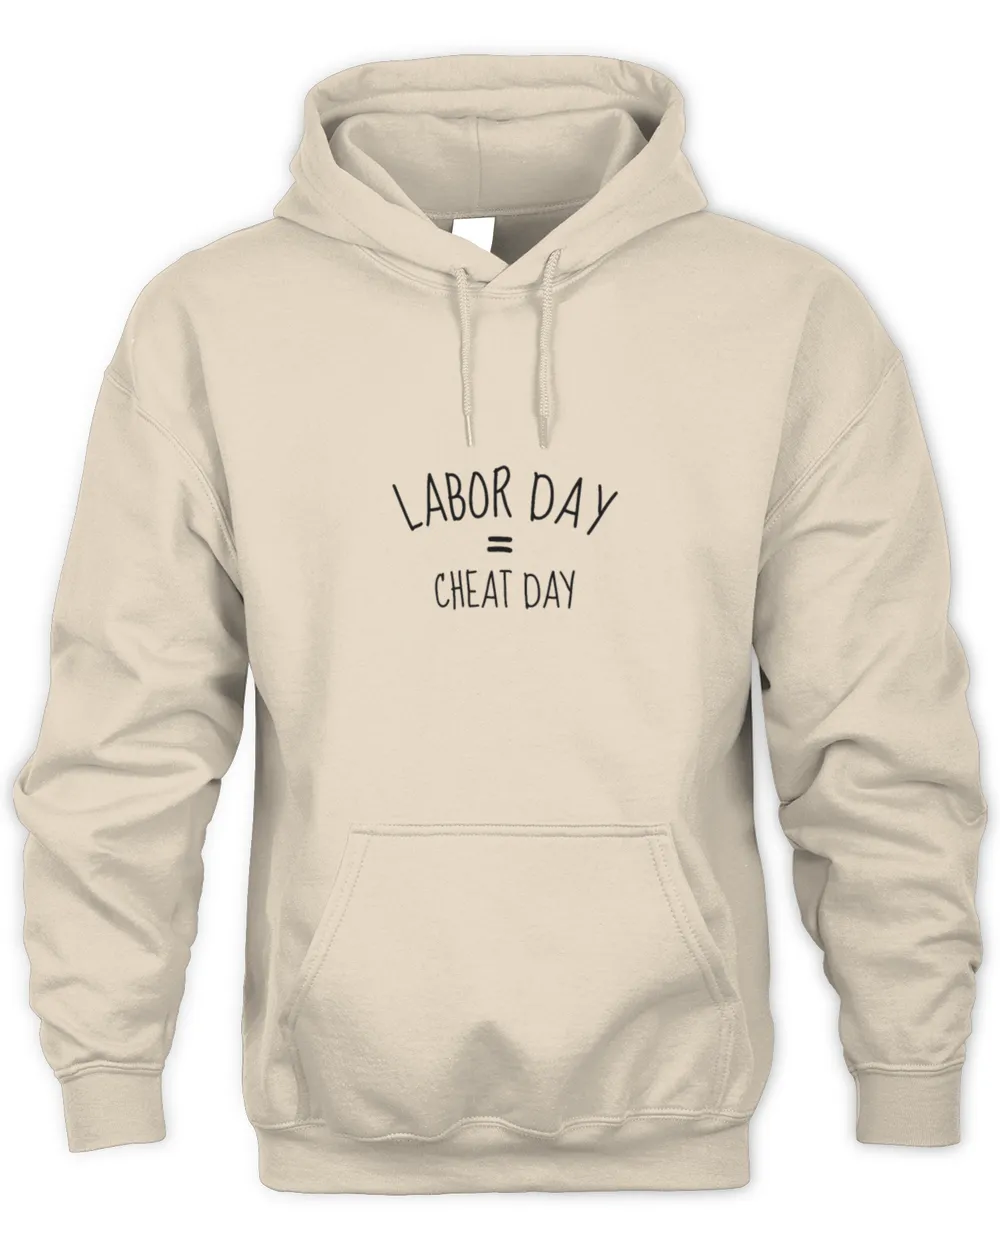 Great gift for Labor Day Labor Day Is Cheat Day